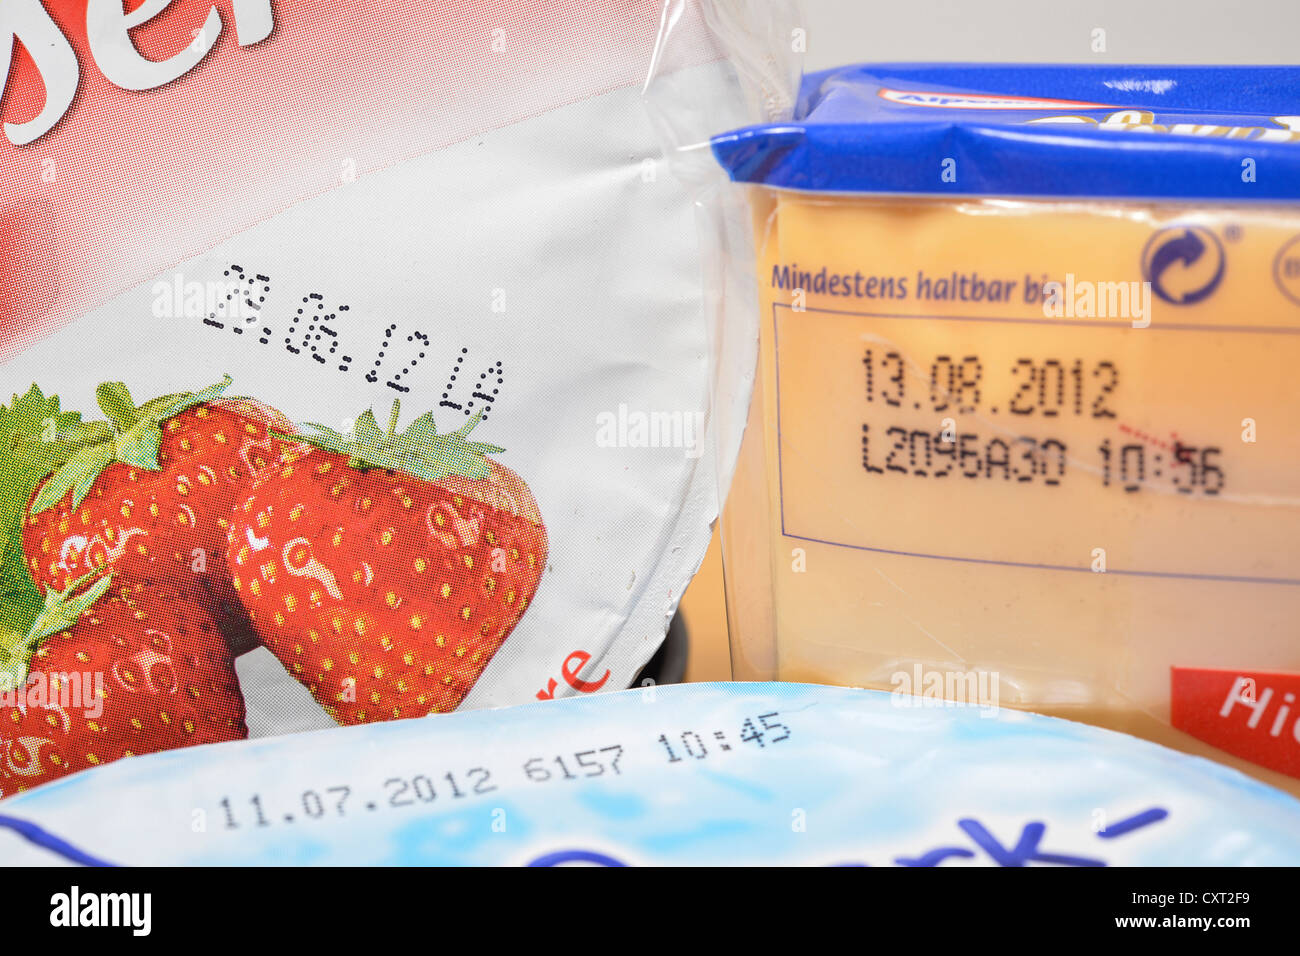 Best before or use-by dates on food products Stock Photo